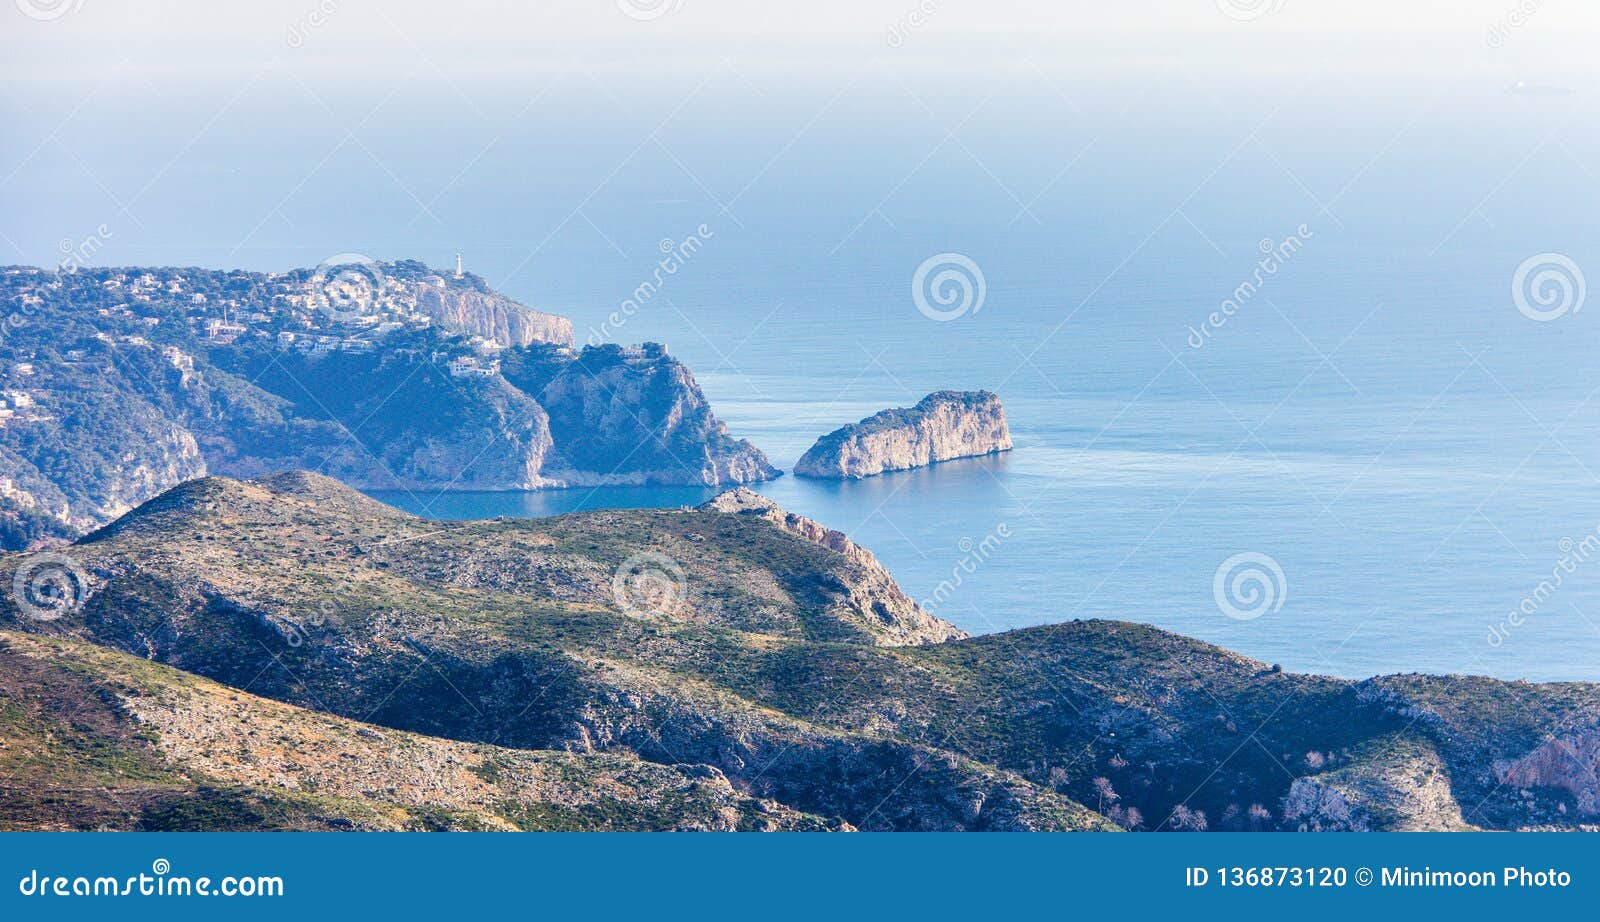 panoramic view of la nao cape in javea, spain. view from cumbre del sol mountain